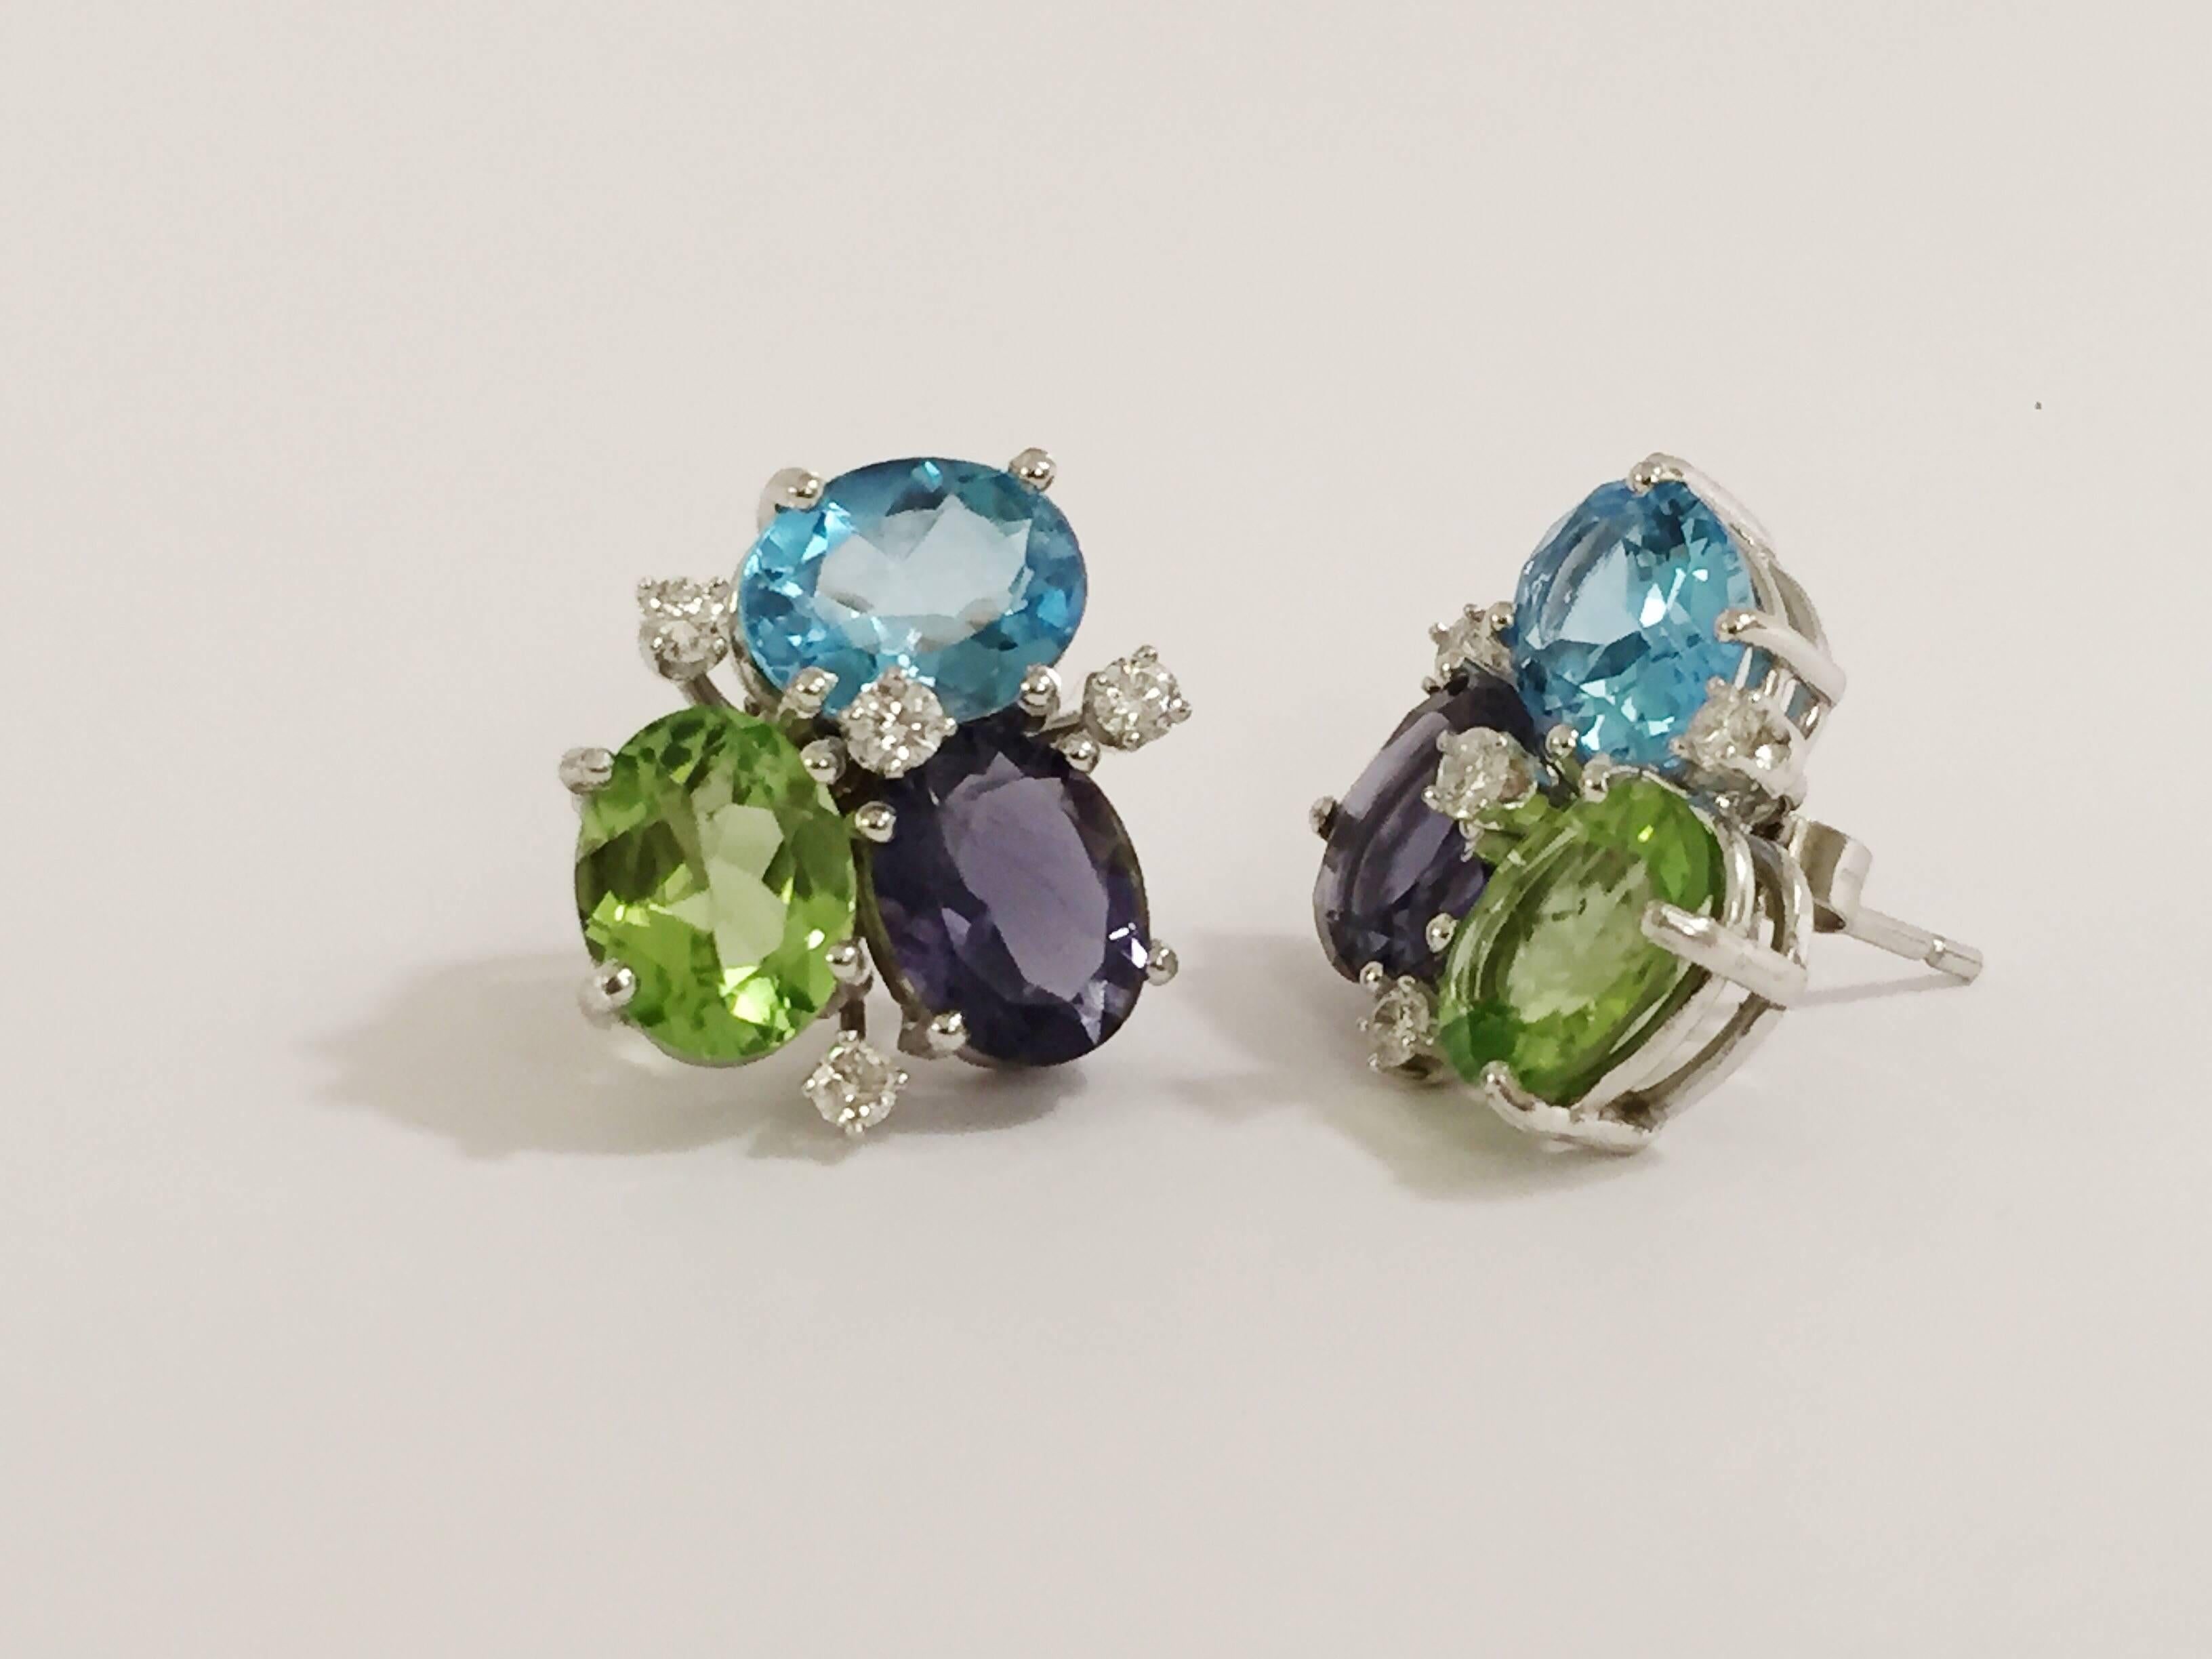 18kt White Gold Blue Topaz, Peridot, Iolite and Diamond Mini Pebble Earring.  

This elegant mini cluster combines faceted oval Blue Topaz,  Peridot and Iolite with the sparkle of 8 diamonds weighing approximately 0.25 cts  

The earrings